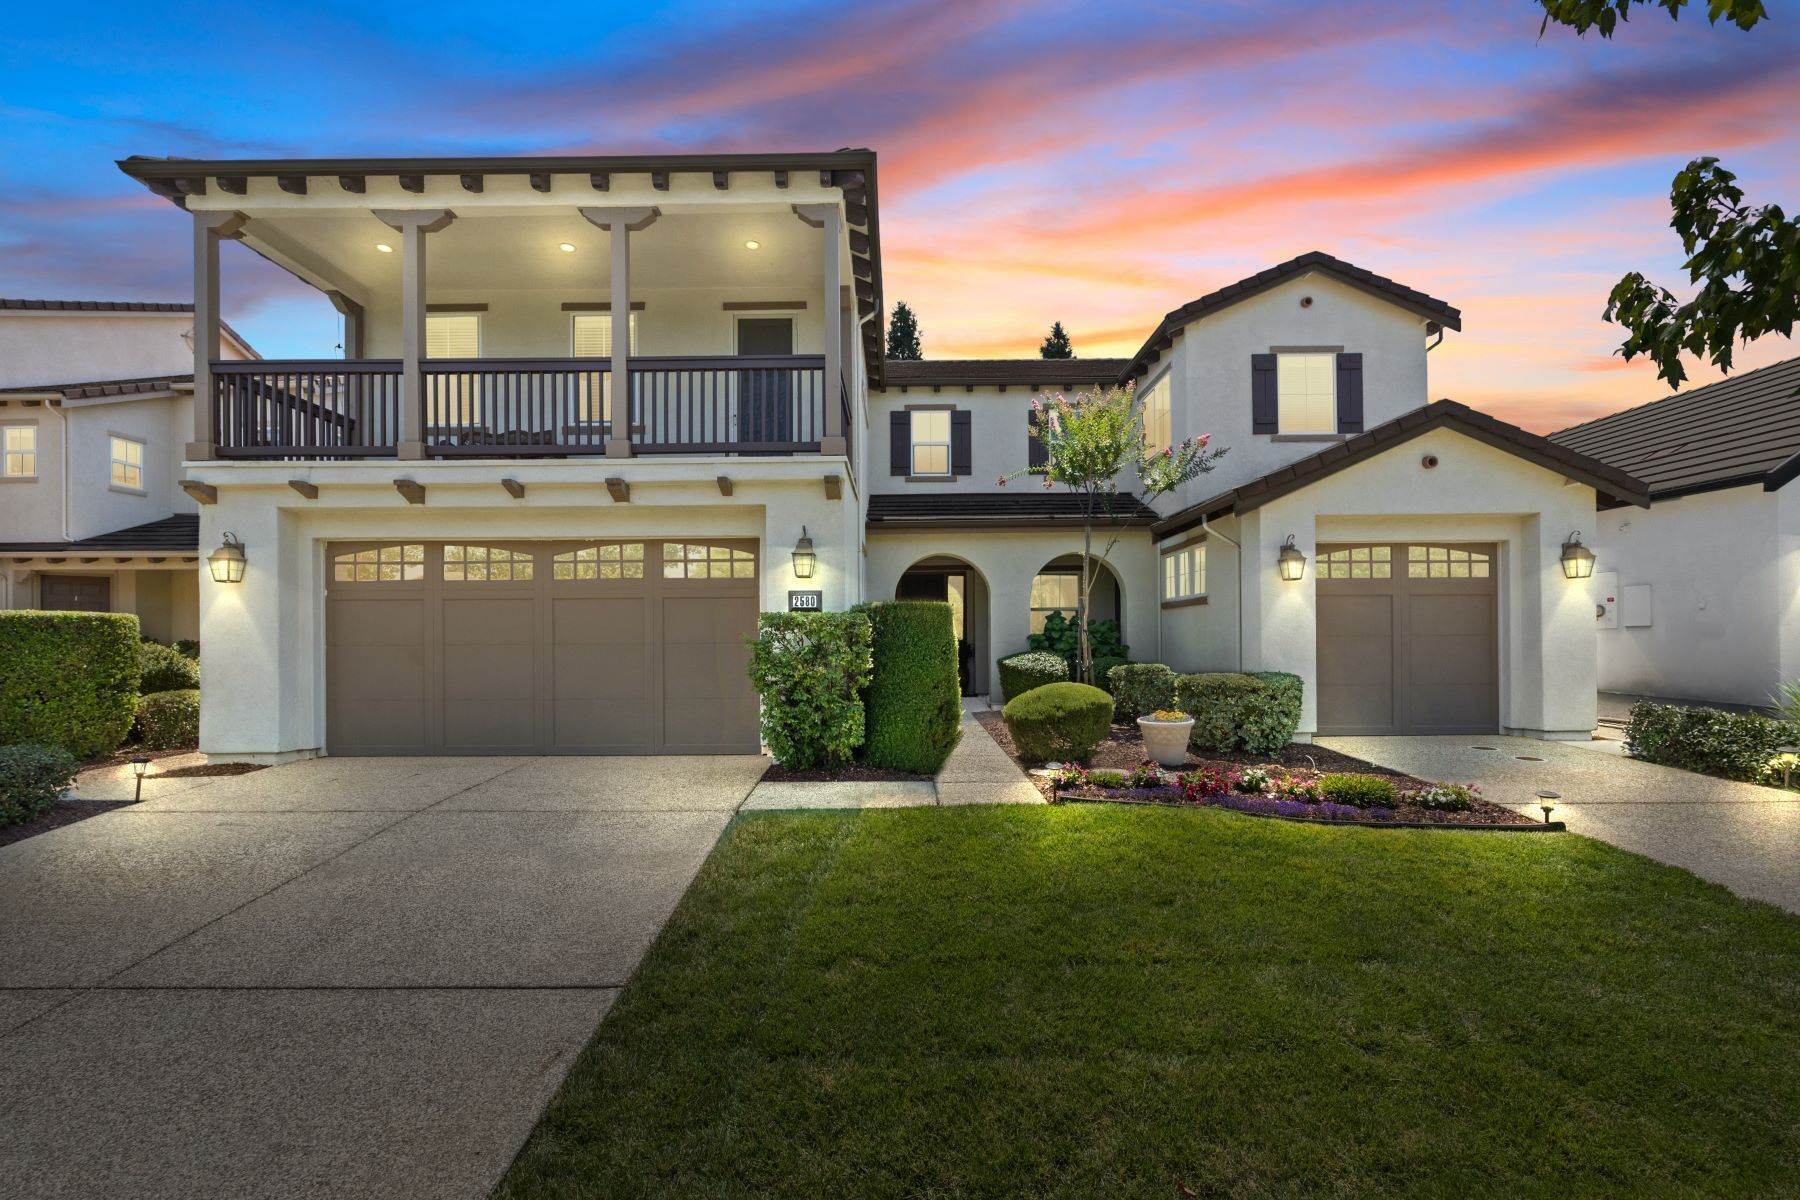 Single Family Homes for Active at 2580 Summerland Way, Roseville, CA 95747 2580 Summerland Way Roseville, California 95747 United States